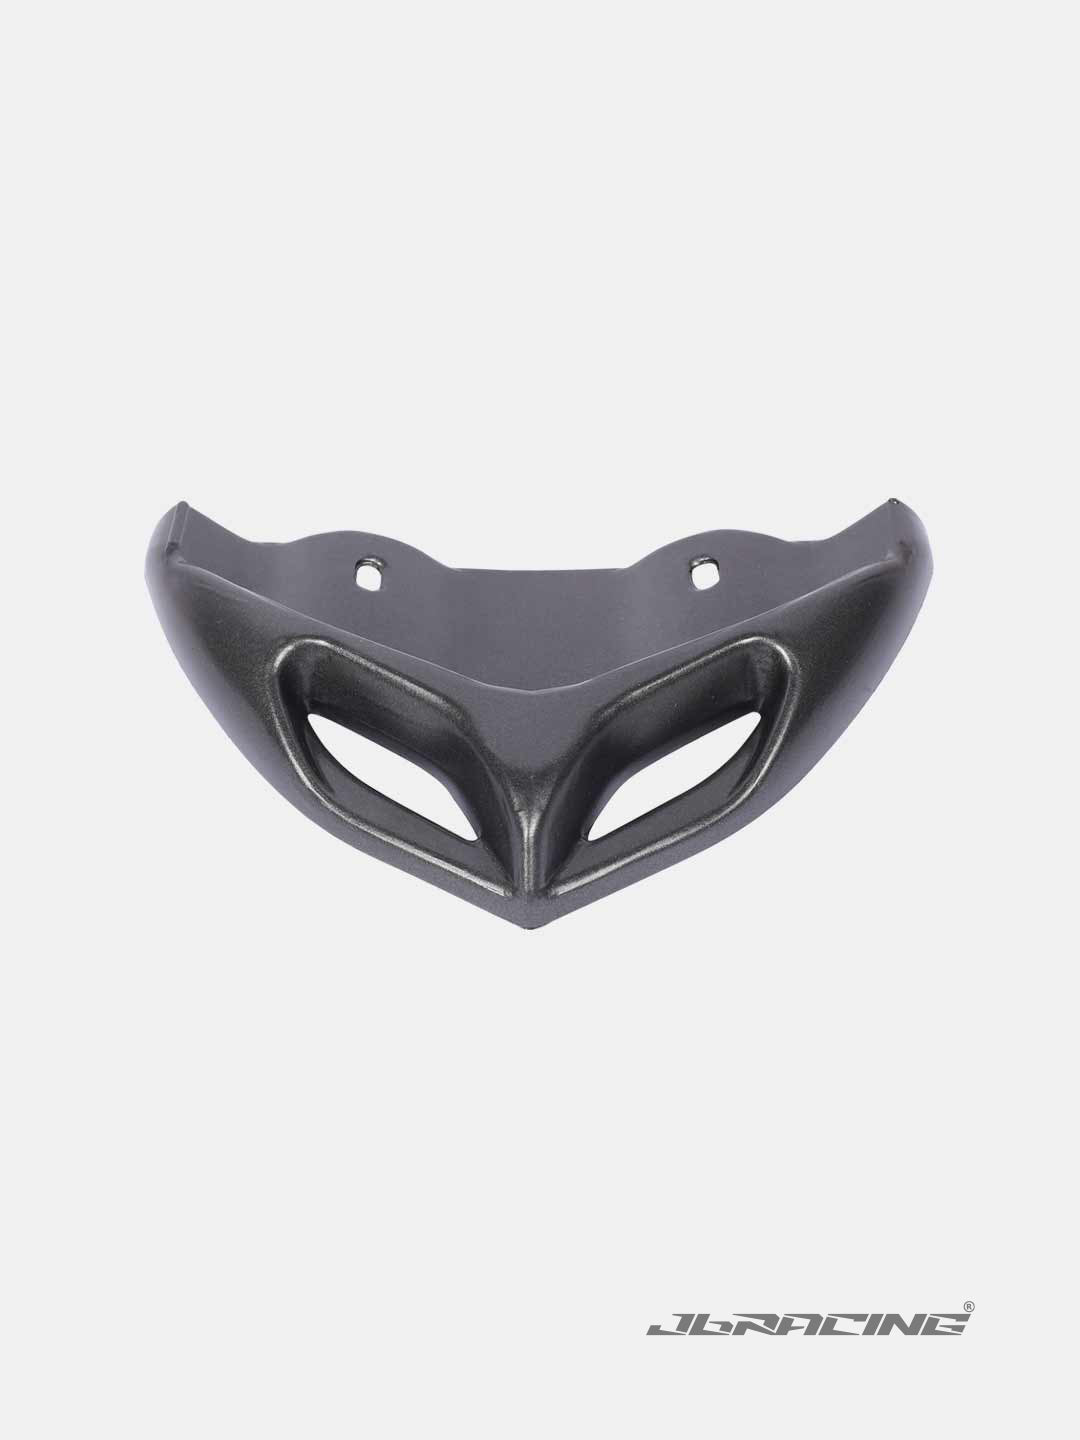 SGTB Both Left Right Side Rear Foot Rest for Pillion Rider Compatible with  Bajaj Dominar 400 250 NS 125 160 200 : Amazon.in: Car & Motorbike